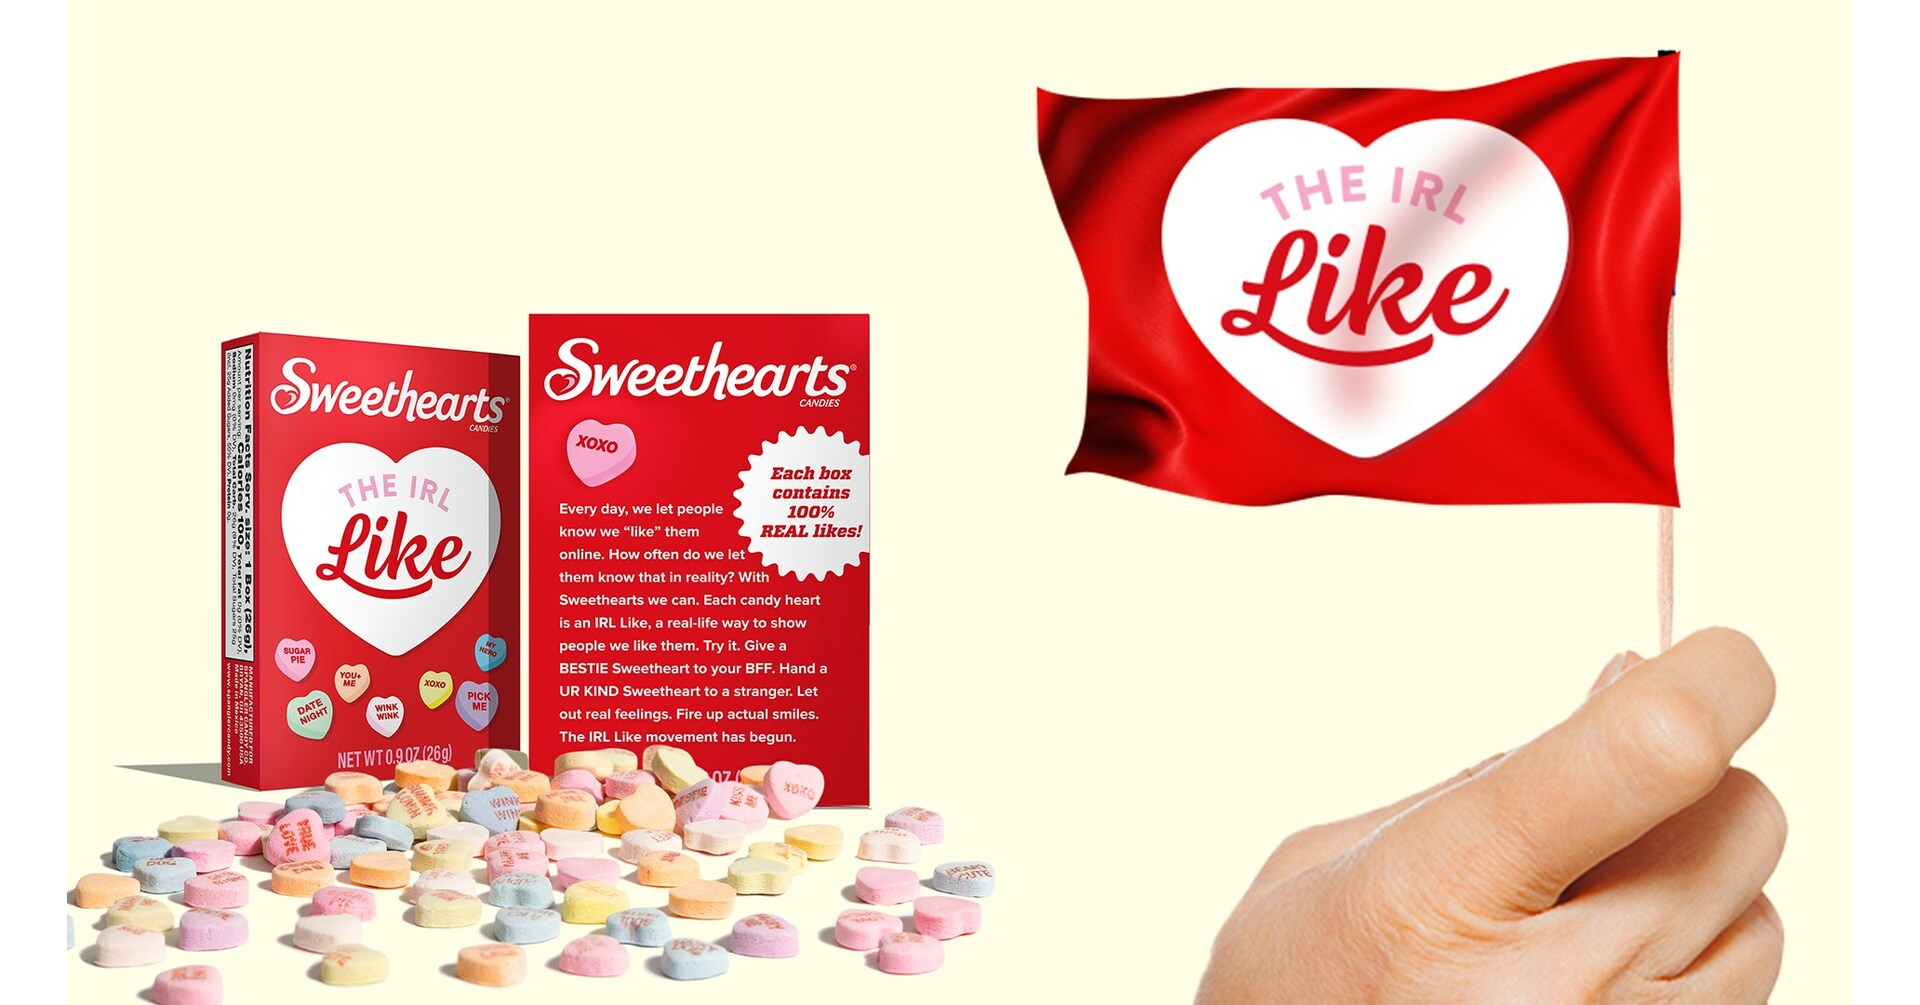 Sweethearts sends 'sweet-and-desist' to Big Tech over 'like' button